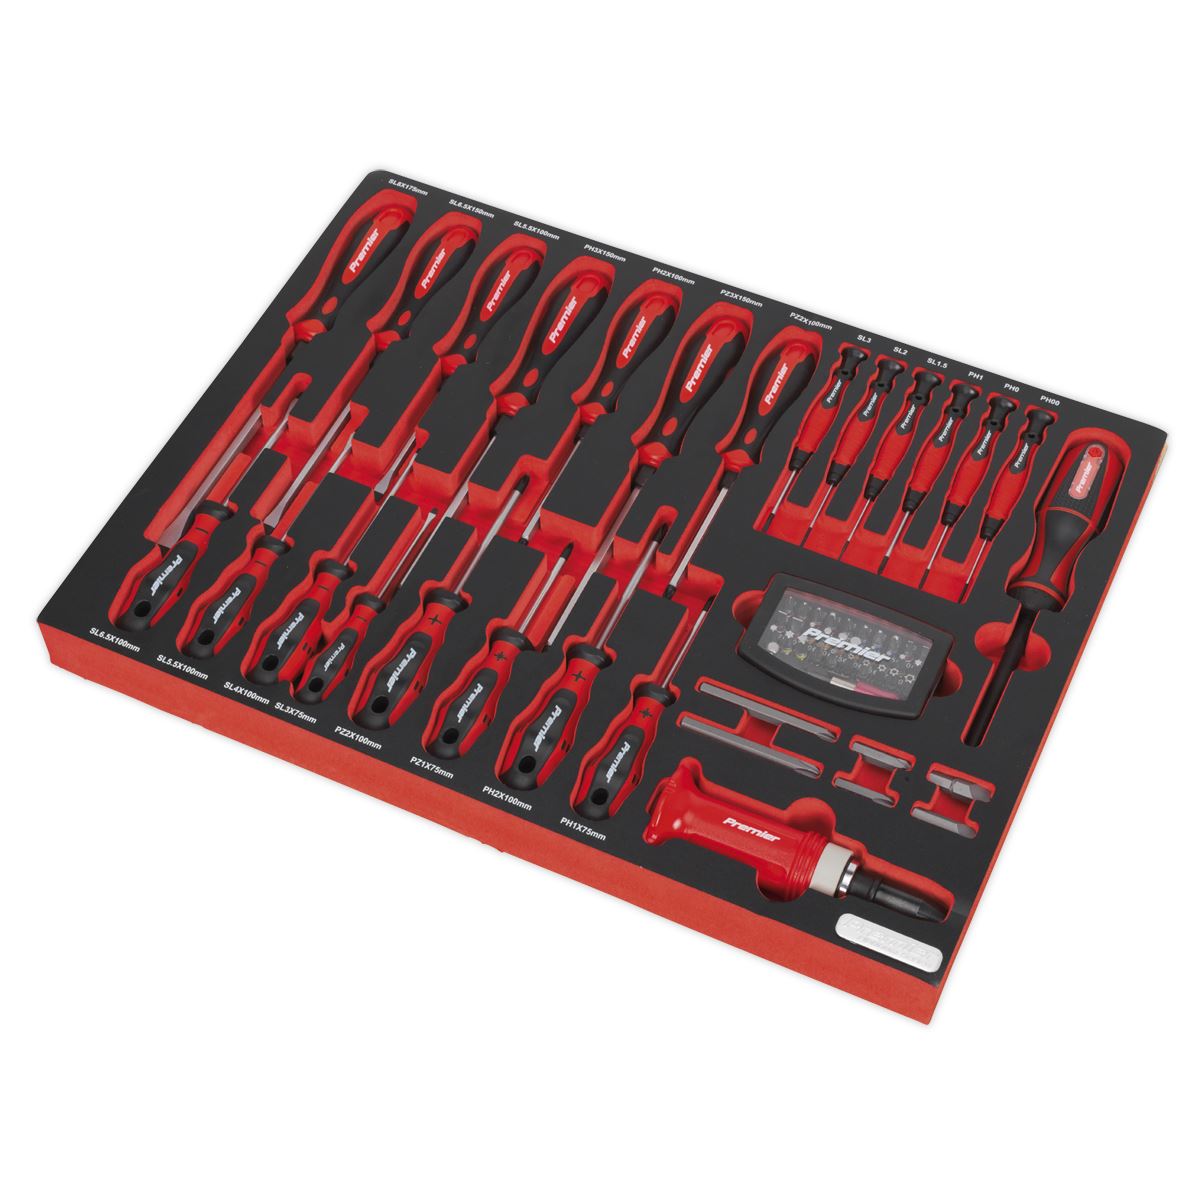 Sealey Premier Tool Tray with Screwdriver Set 72pc